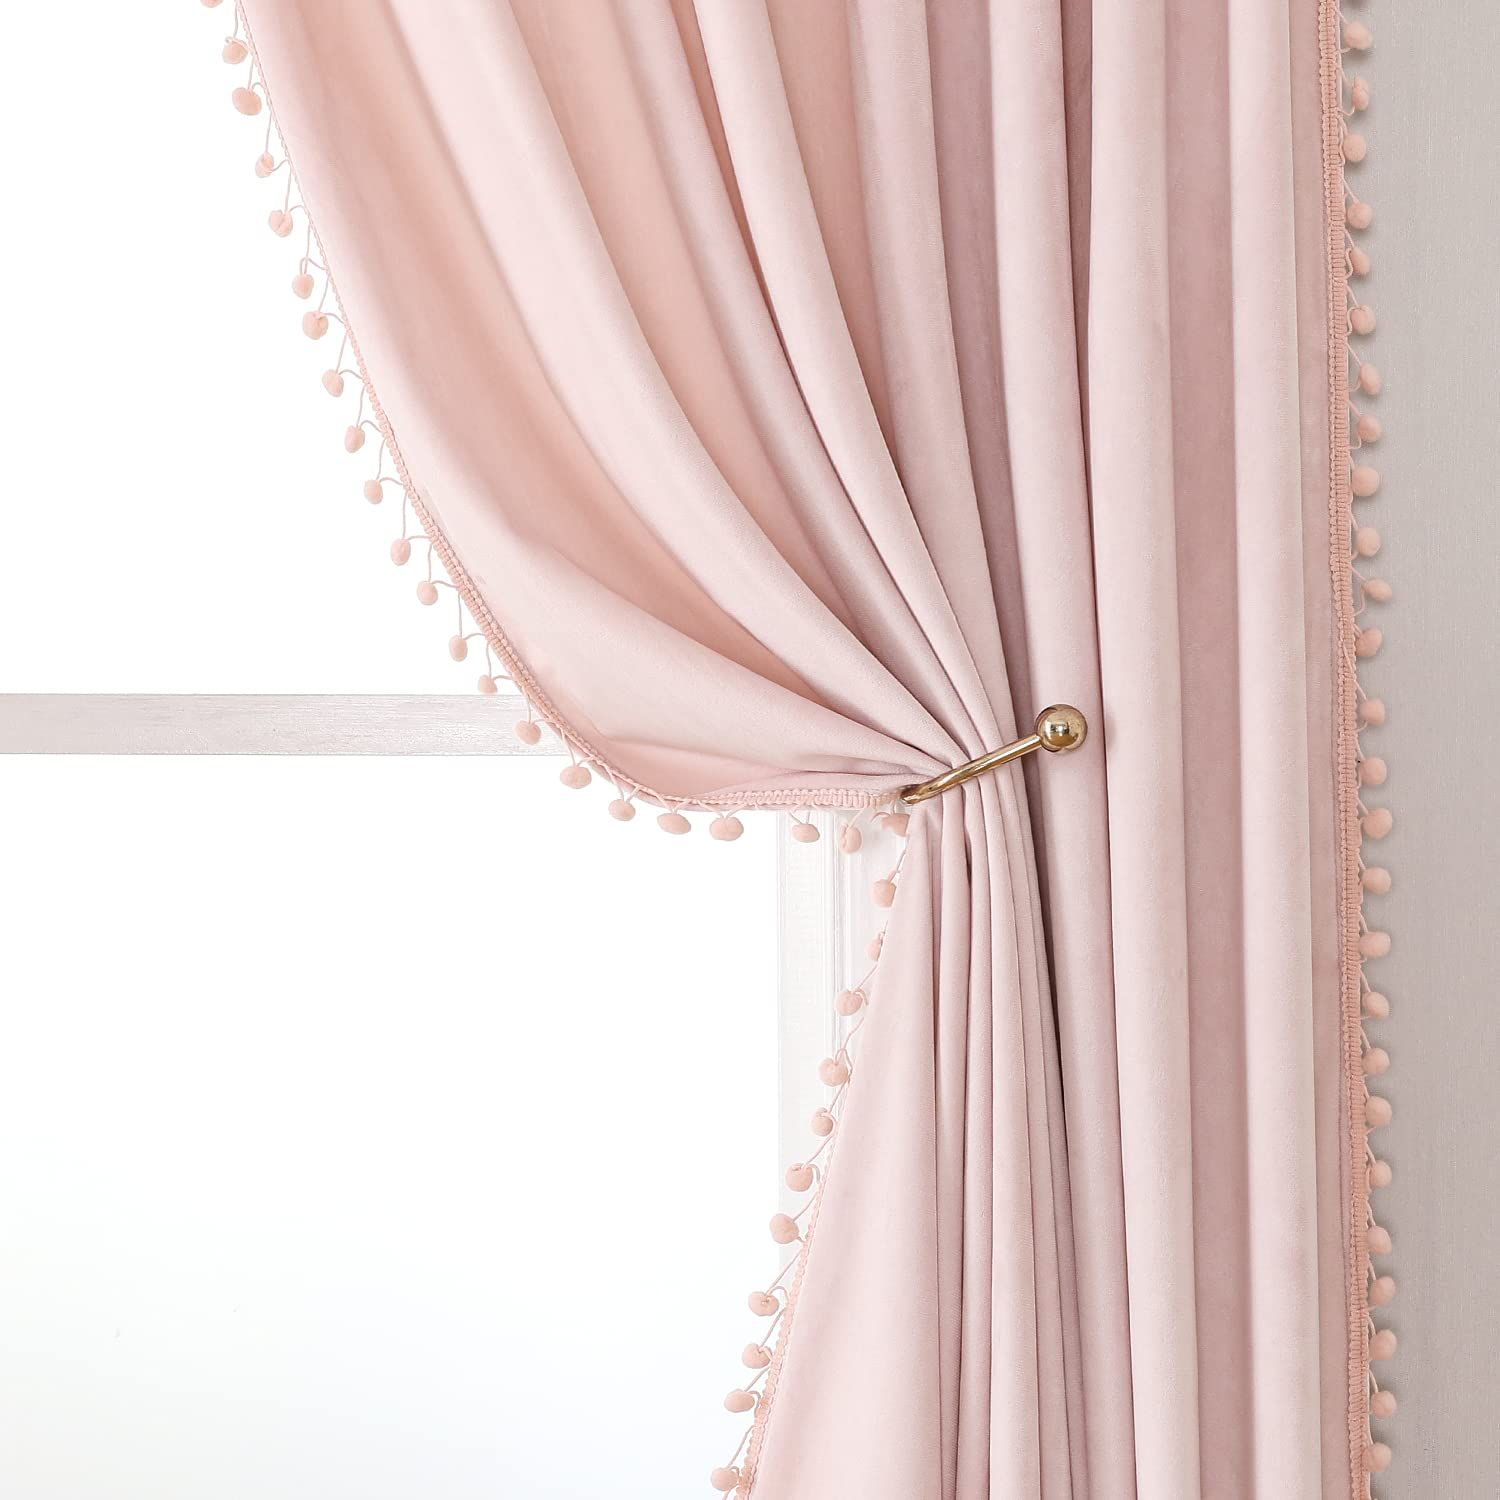 Pink Curtains: Add a Pop of Color to Your Window Décor with Pink Curtains